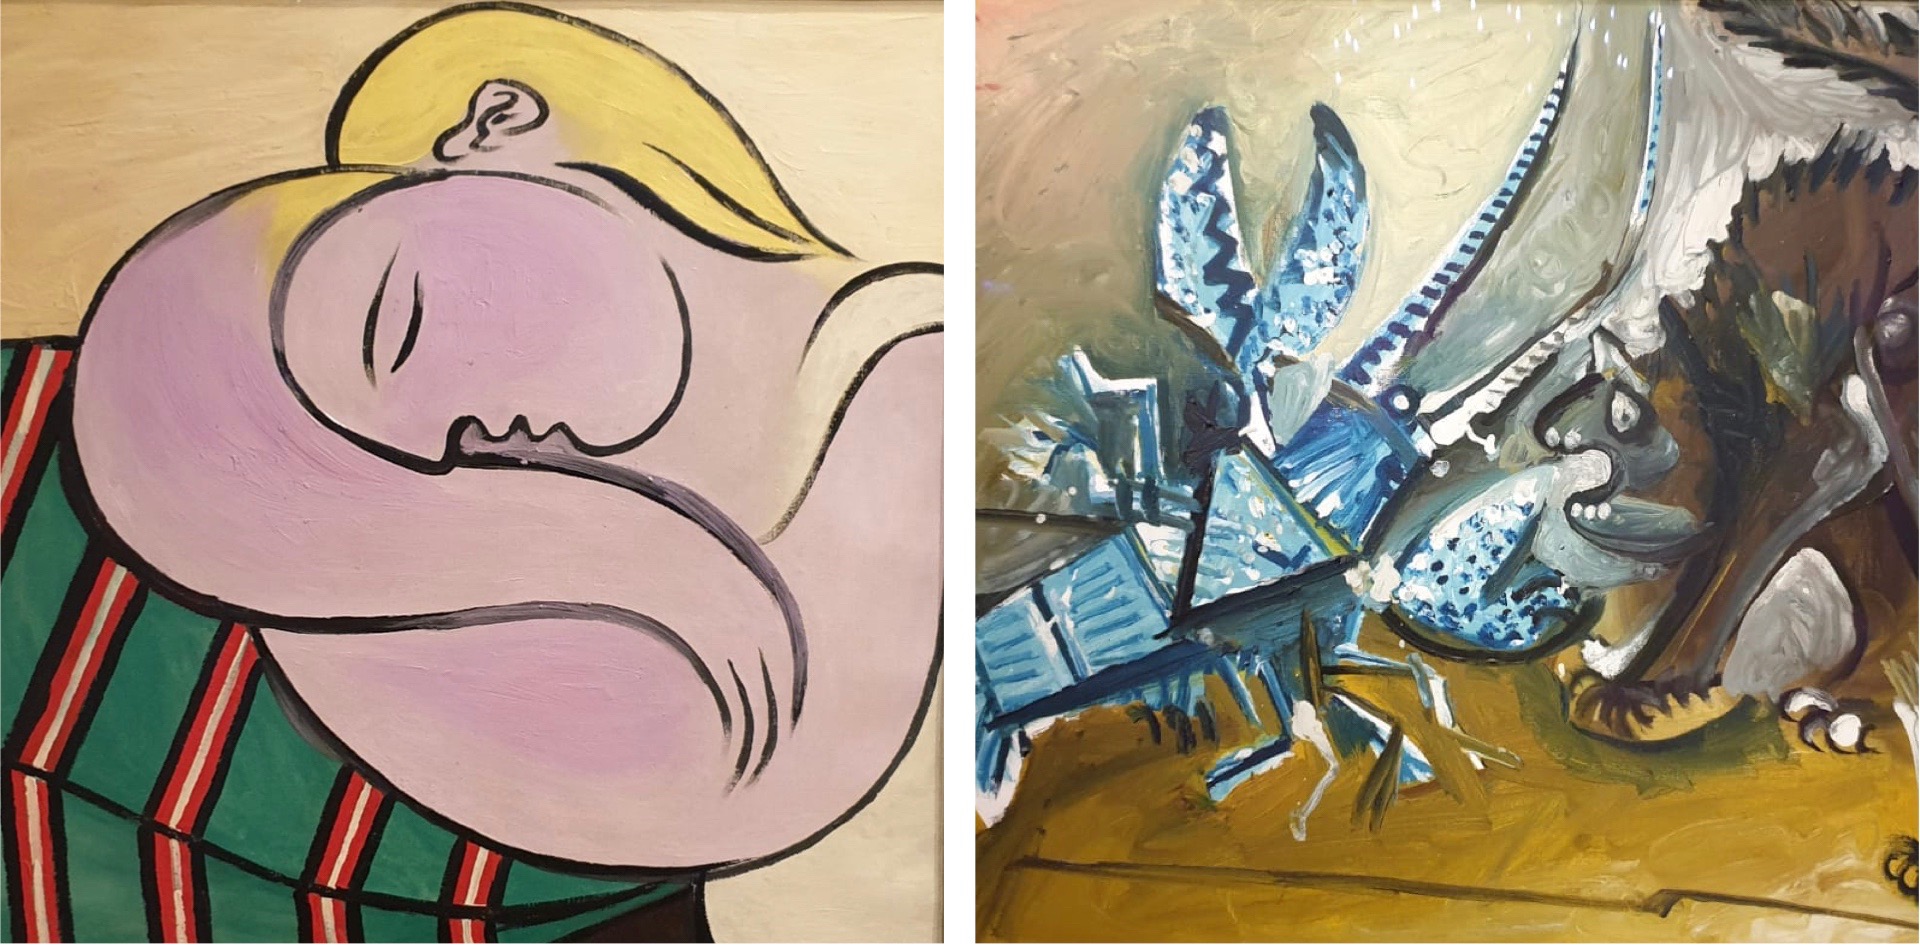 Lot-Art | From Van Gogh to Picasso: The Guggenheim at Palazzo Reale, Milan